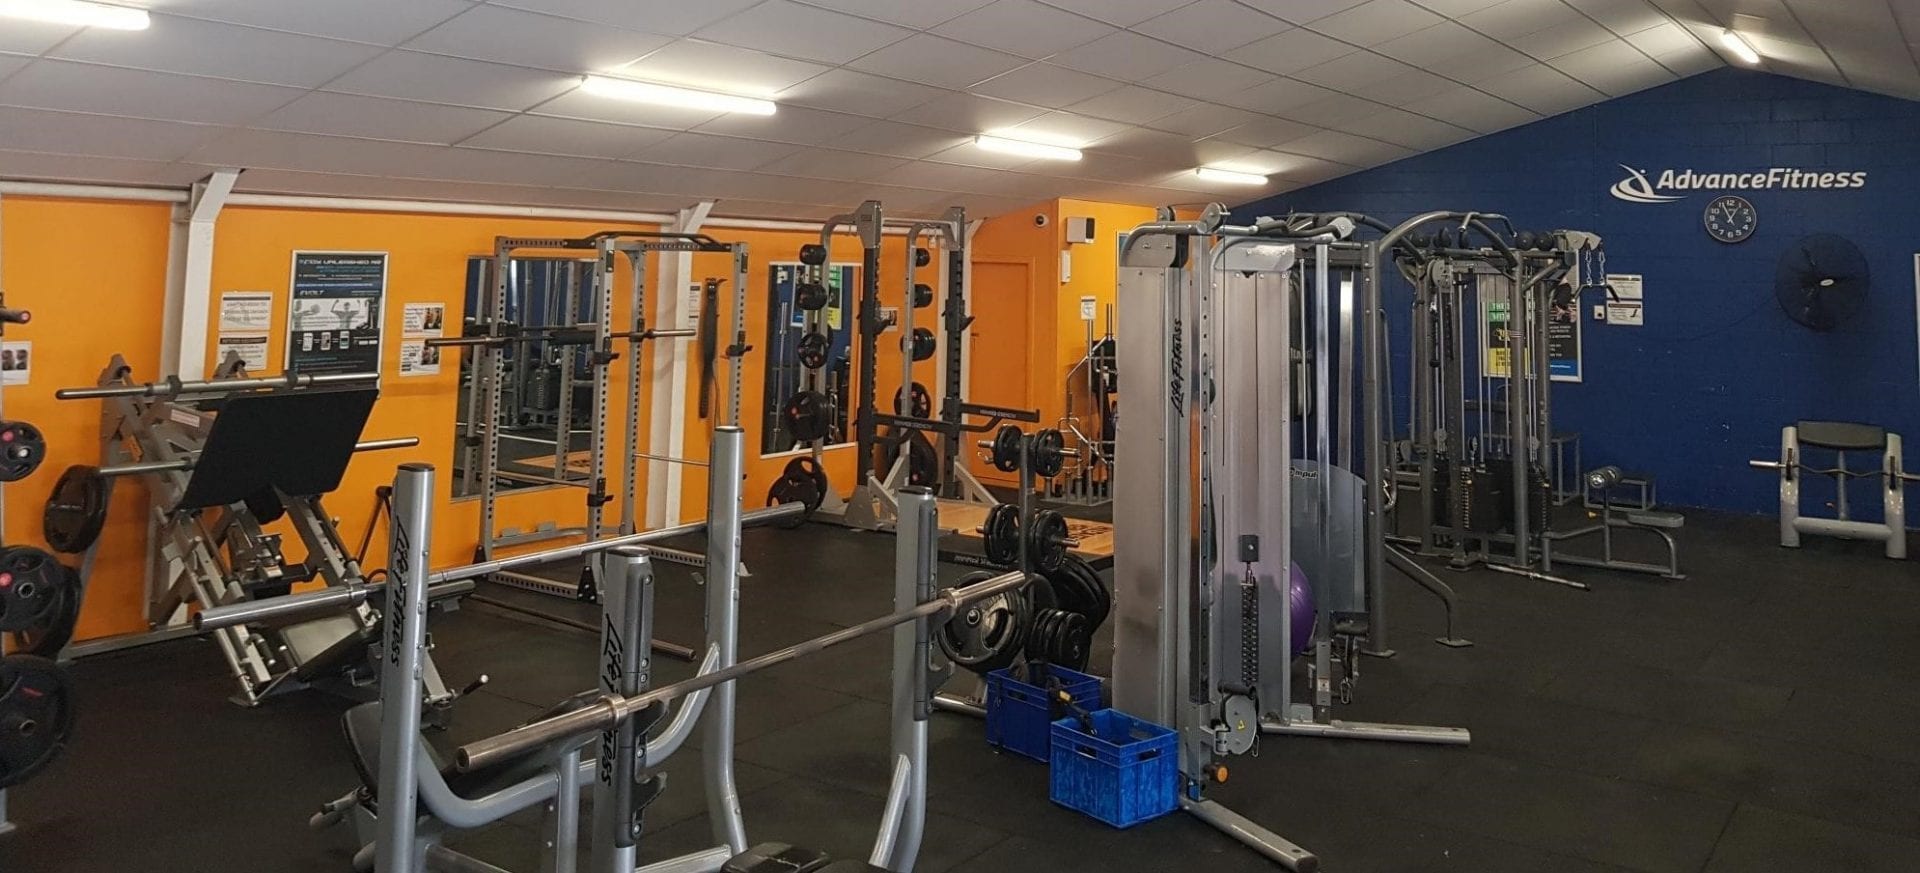 Advance Fitness Invercargill 24/7 Gym Weights Area